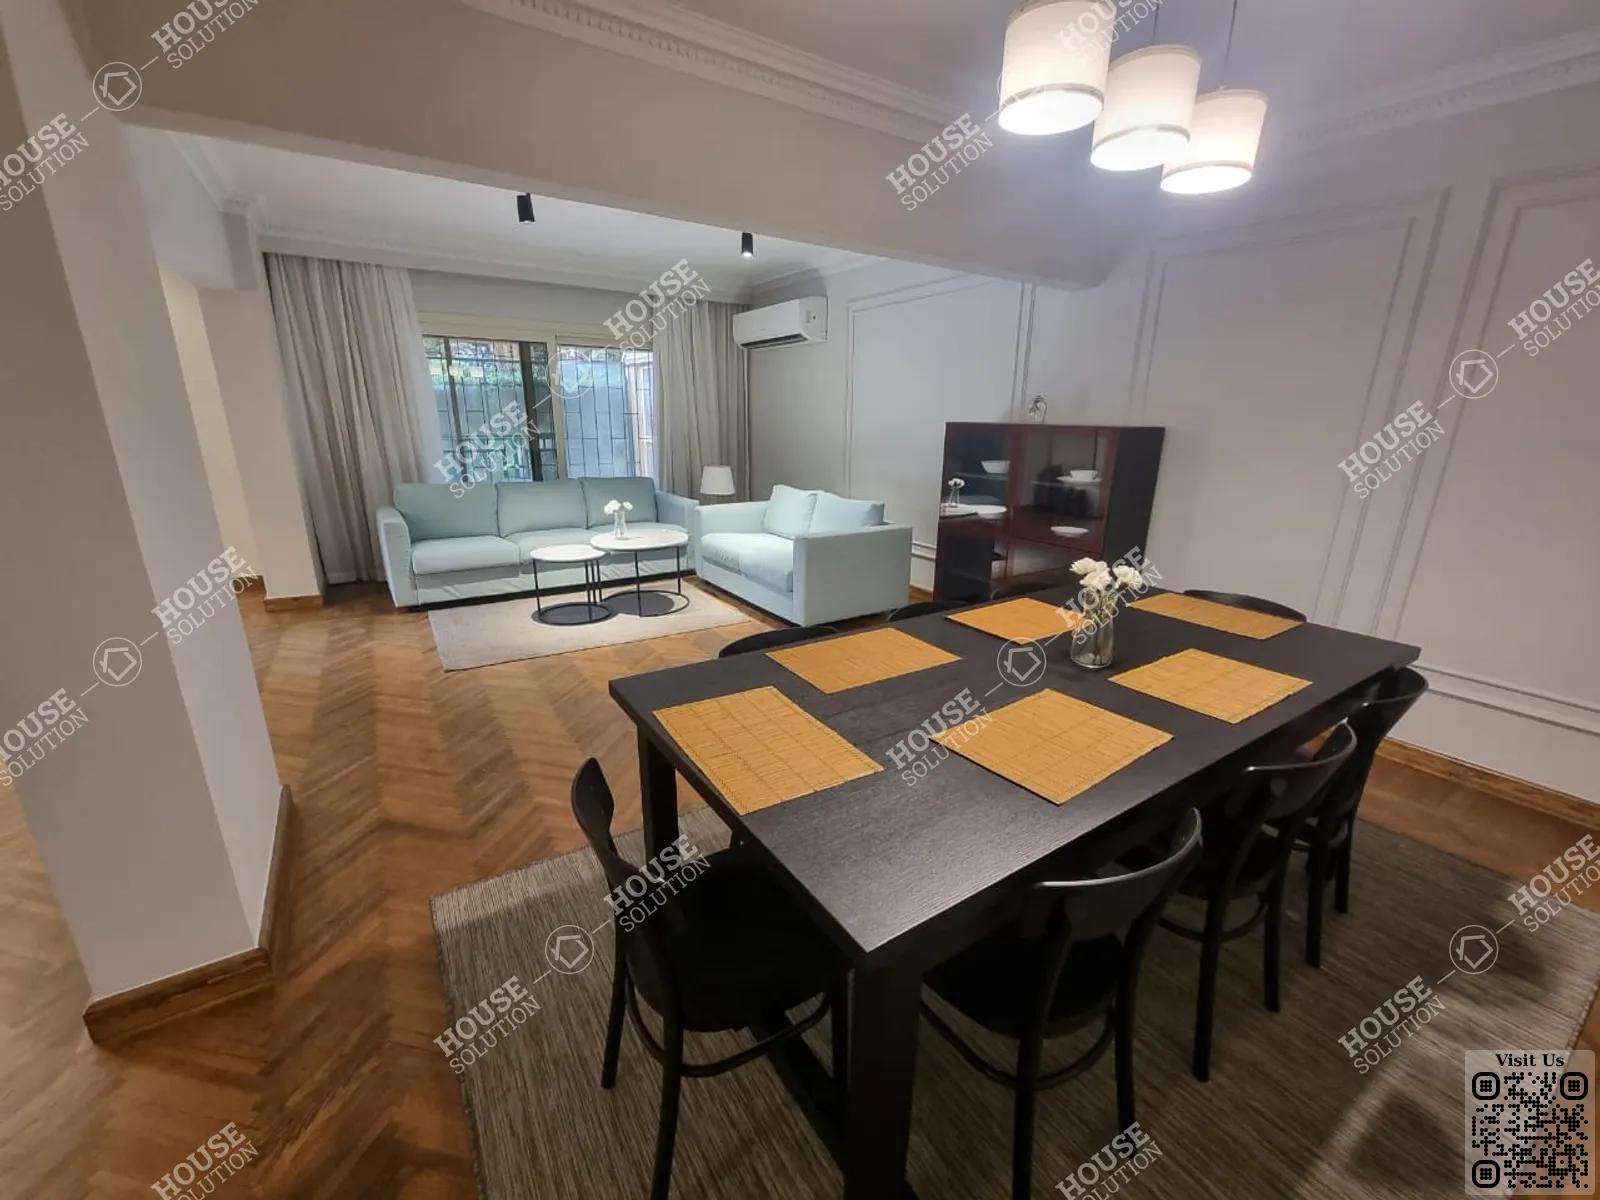 DINING AREA @ Ground Floors For Rent In Maadi Maadi Degla Area: 220 m² consists of 4 Bedrooms 4 Bathrooms Modern furnished 5 stars #5777-2